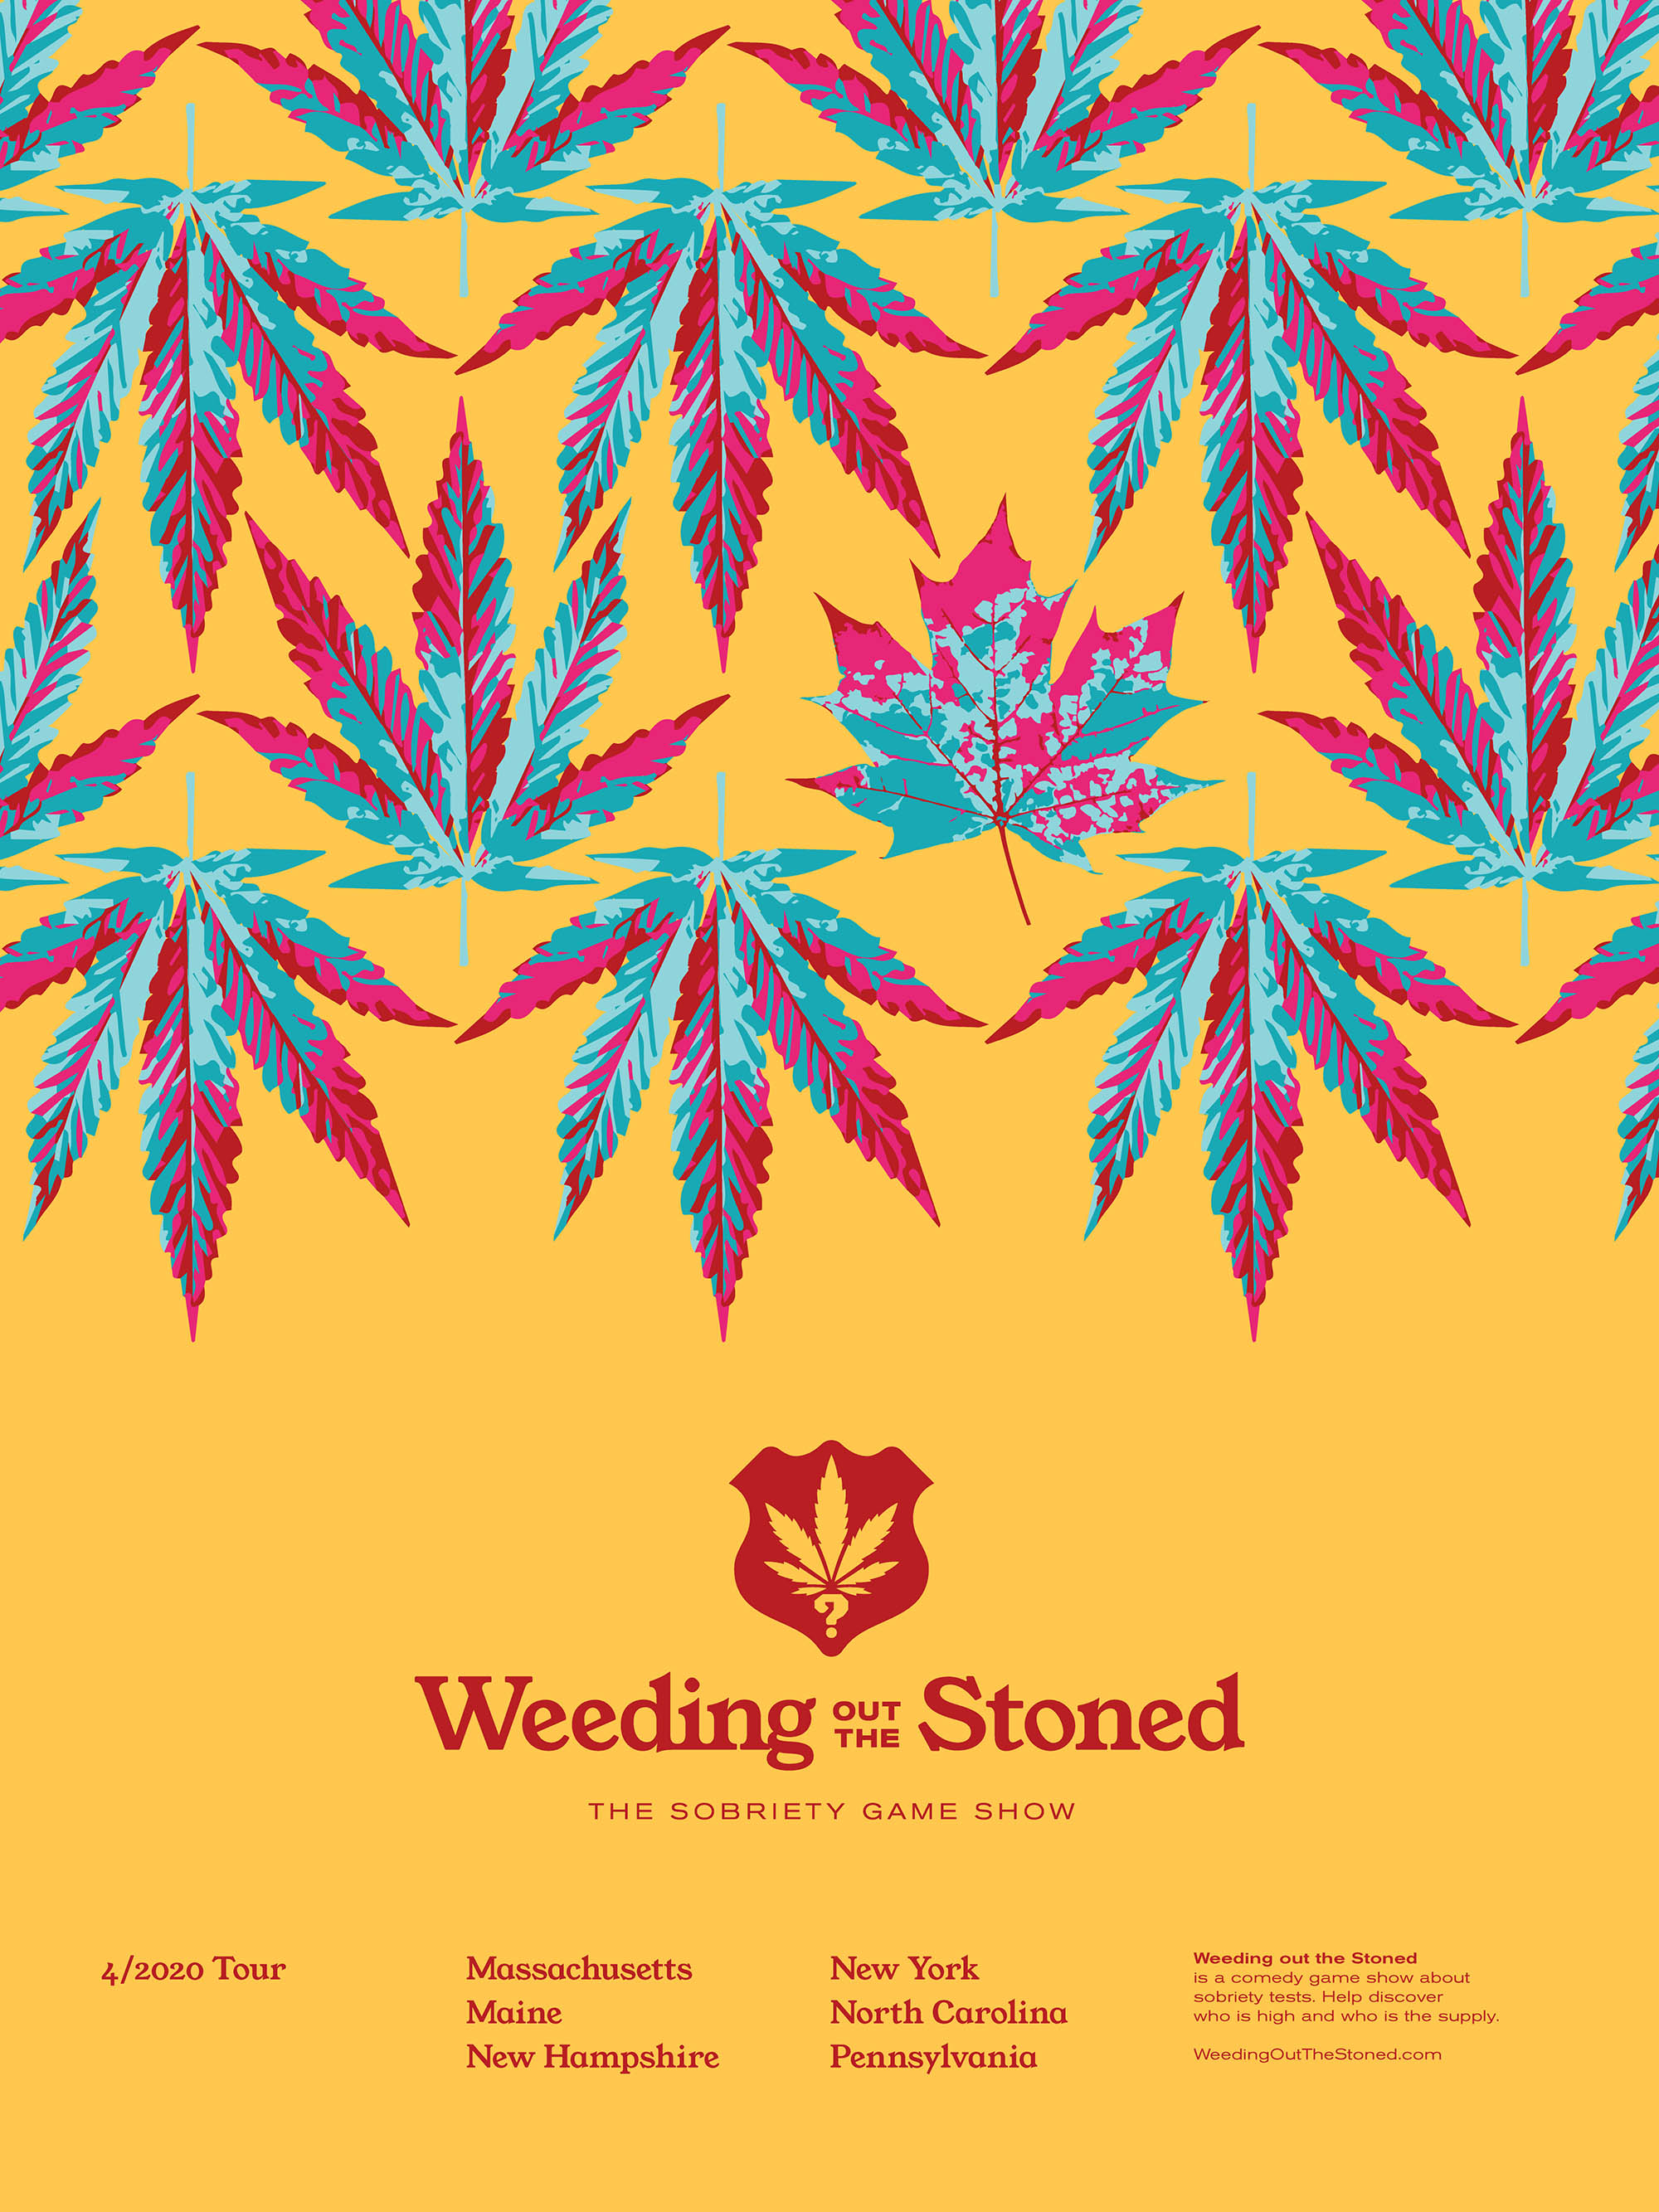 image of weeding out the stoned poster